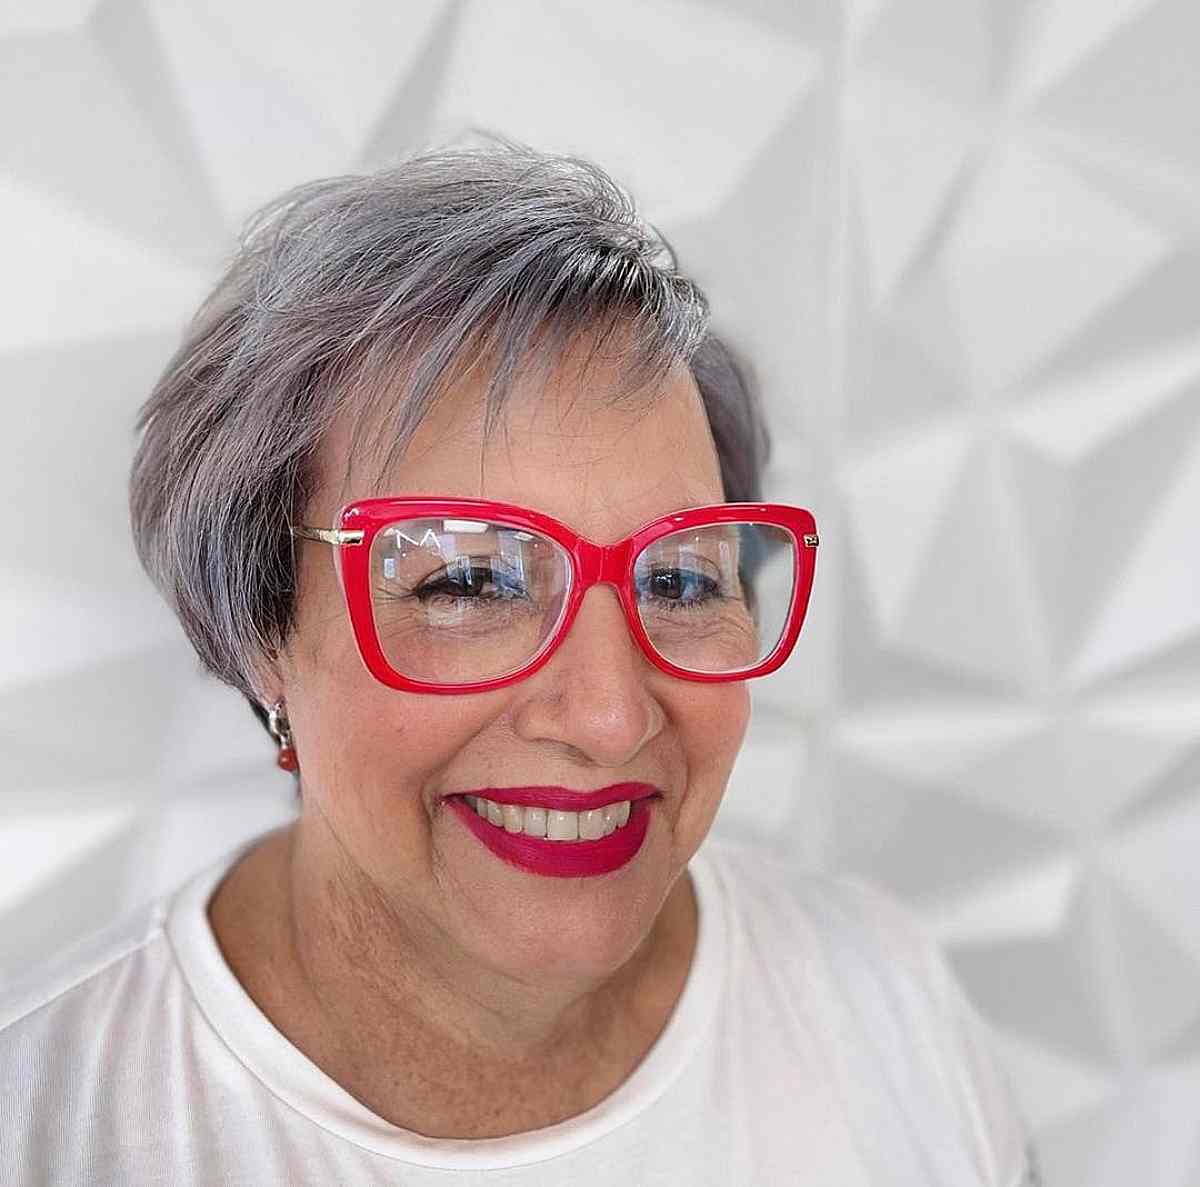 Short Bixie Cut for Older Women Over 50 with Glasses